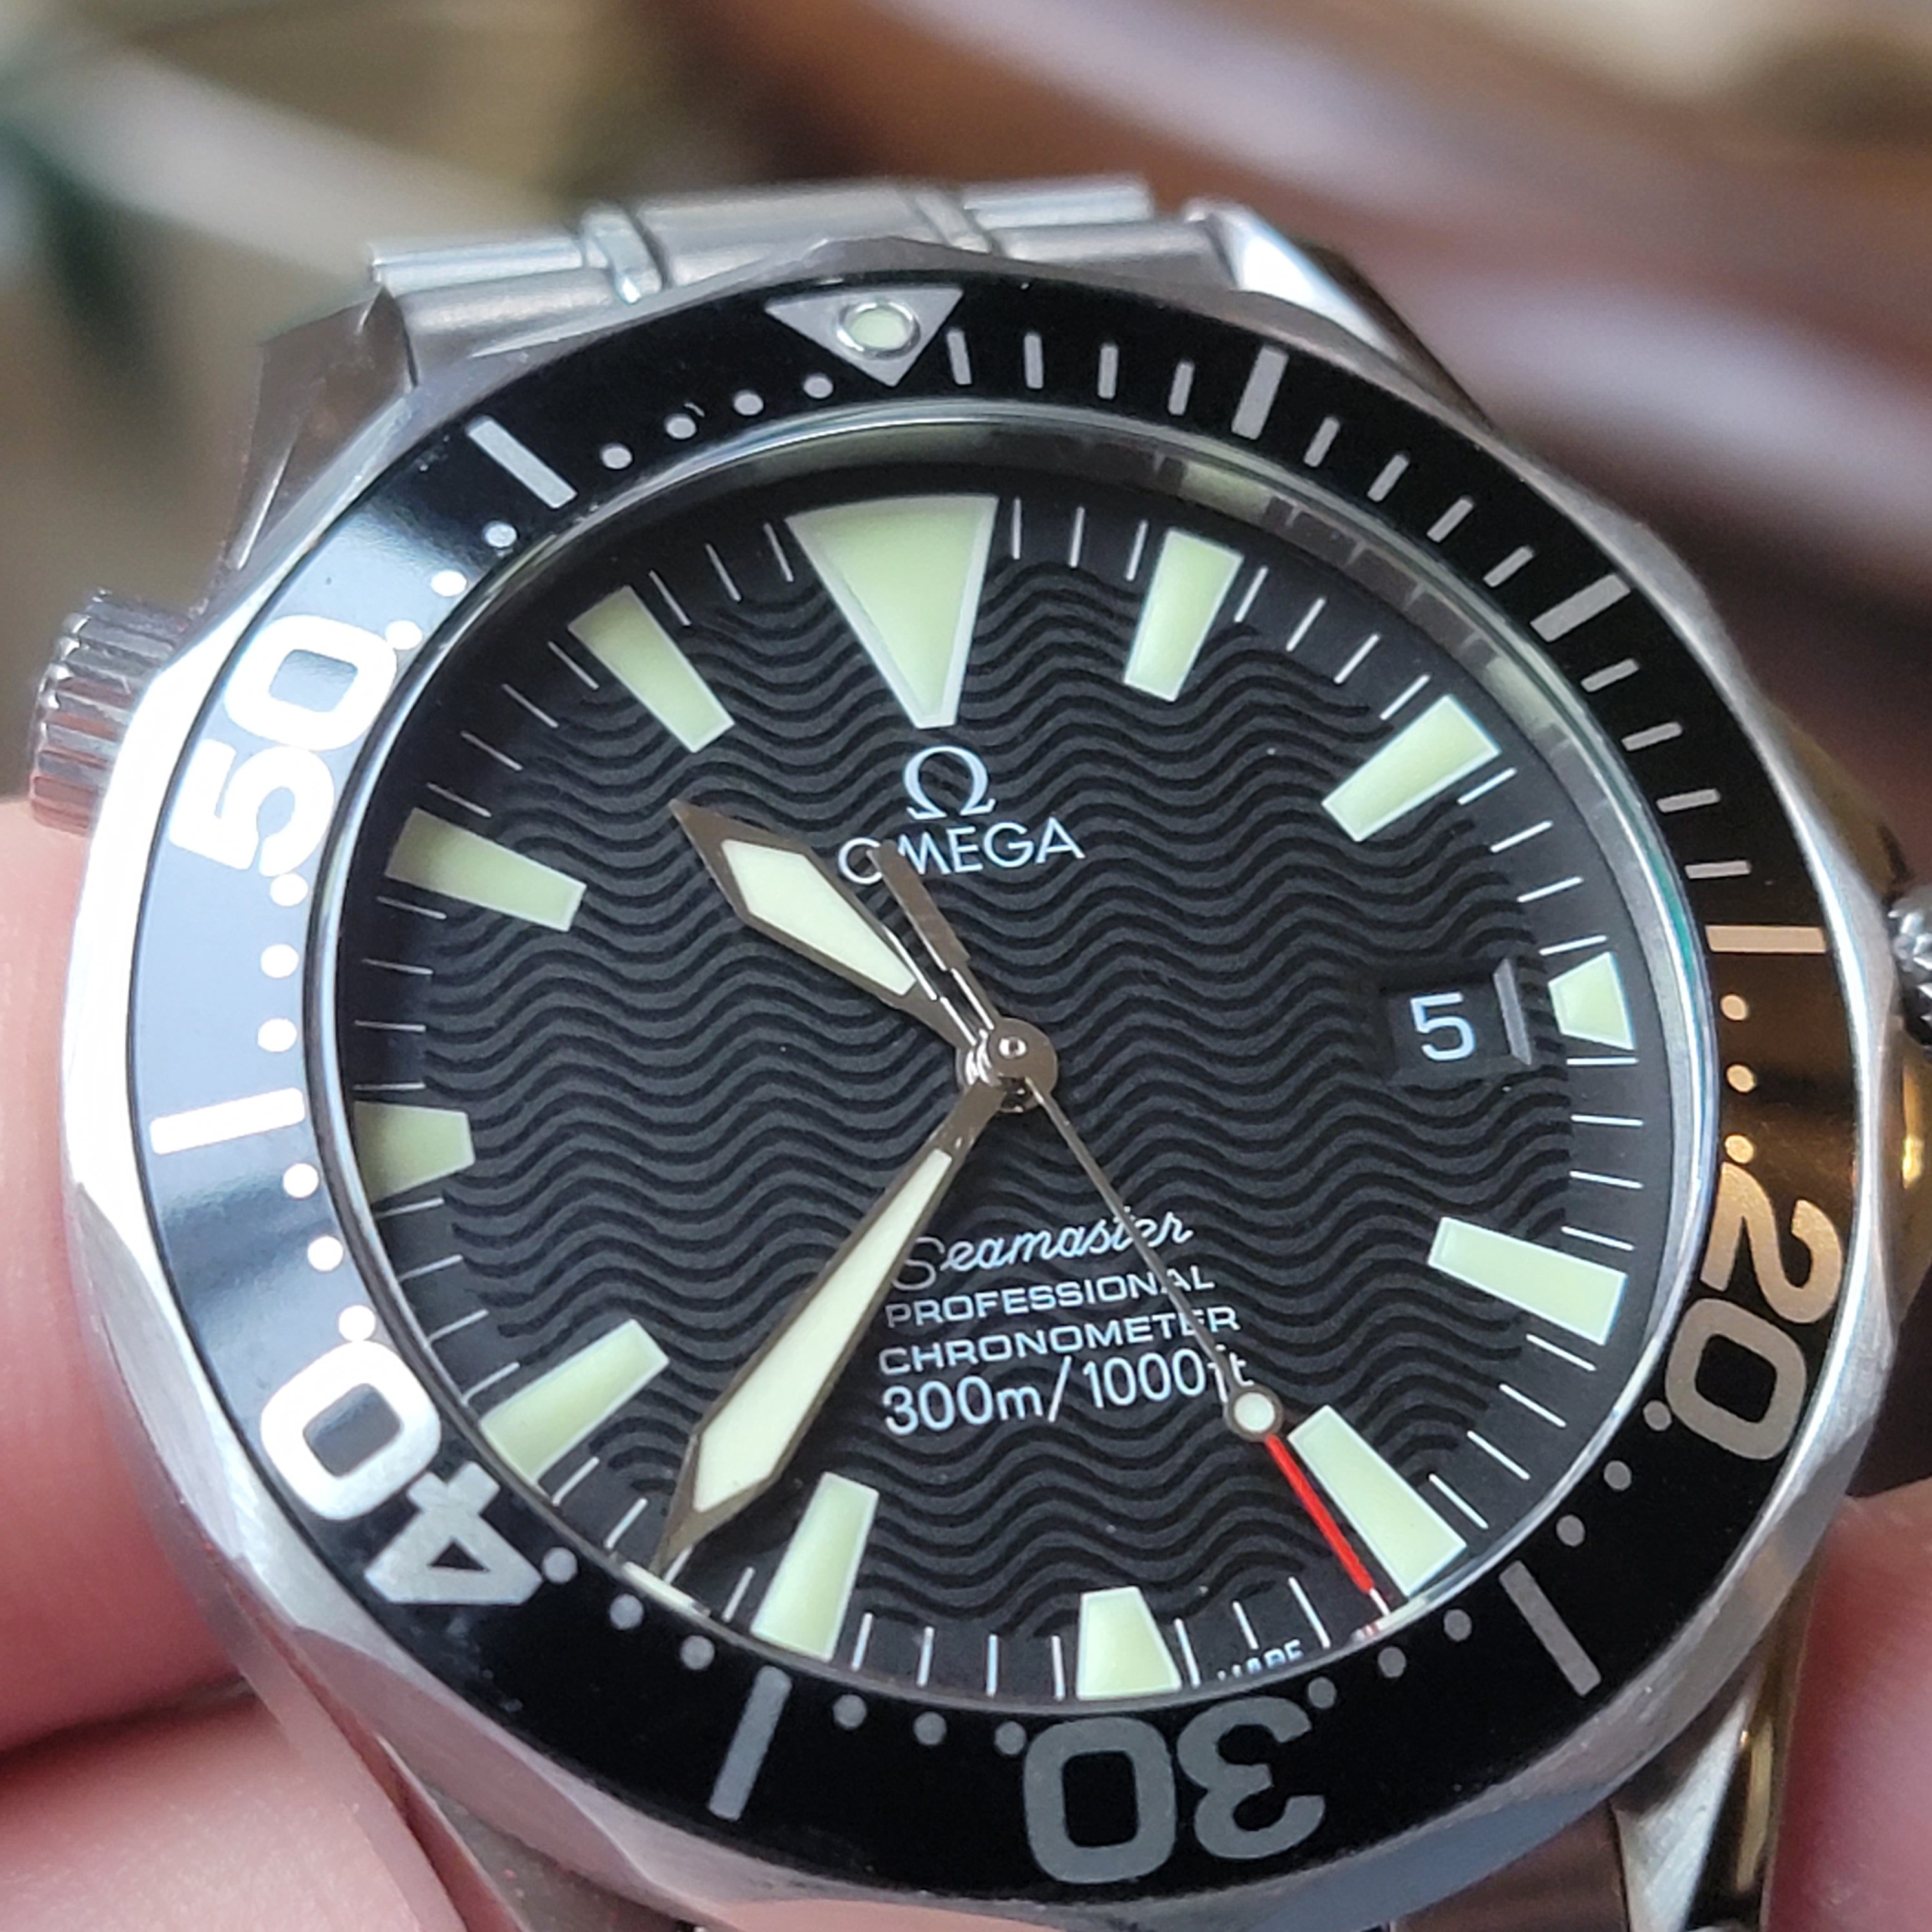 Seamaster 2254.50 | Page 3 | Omega Forums